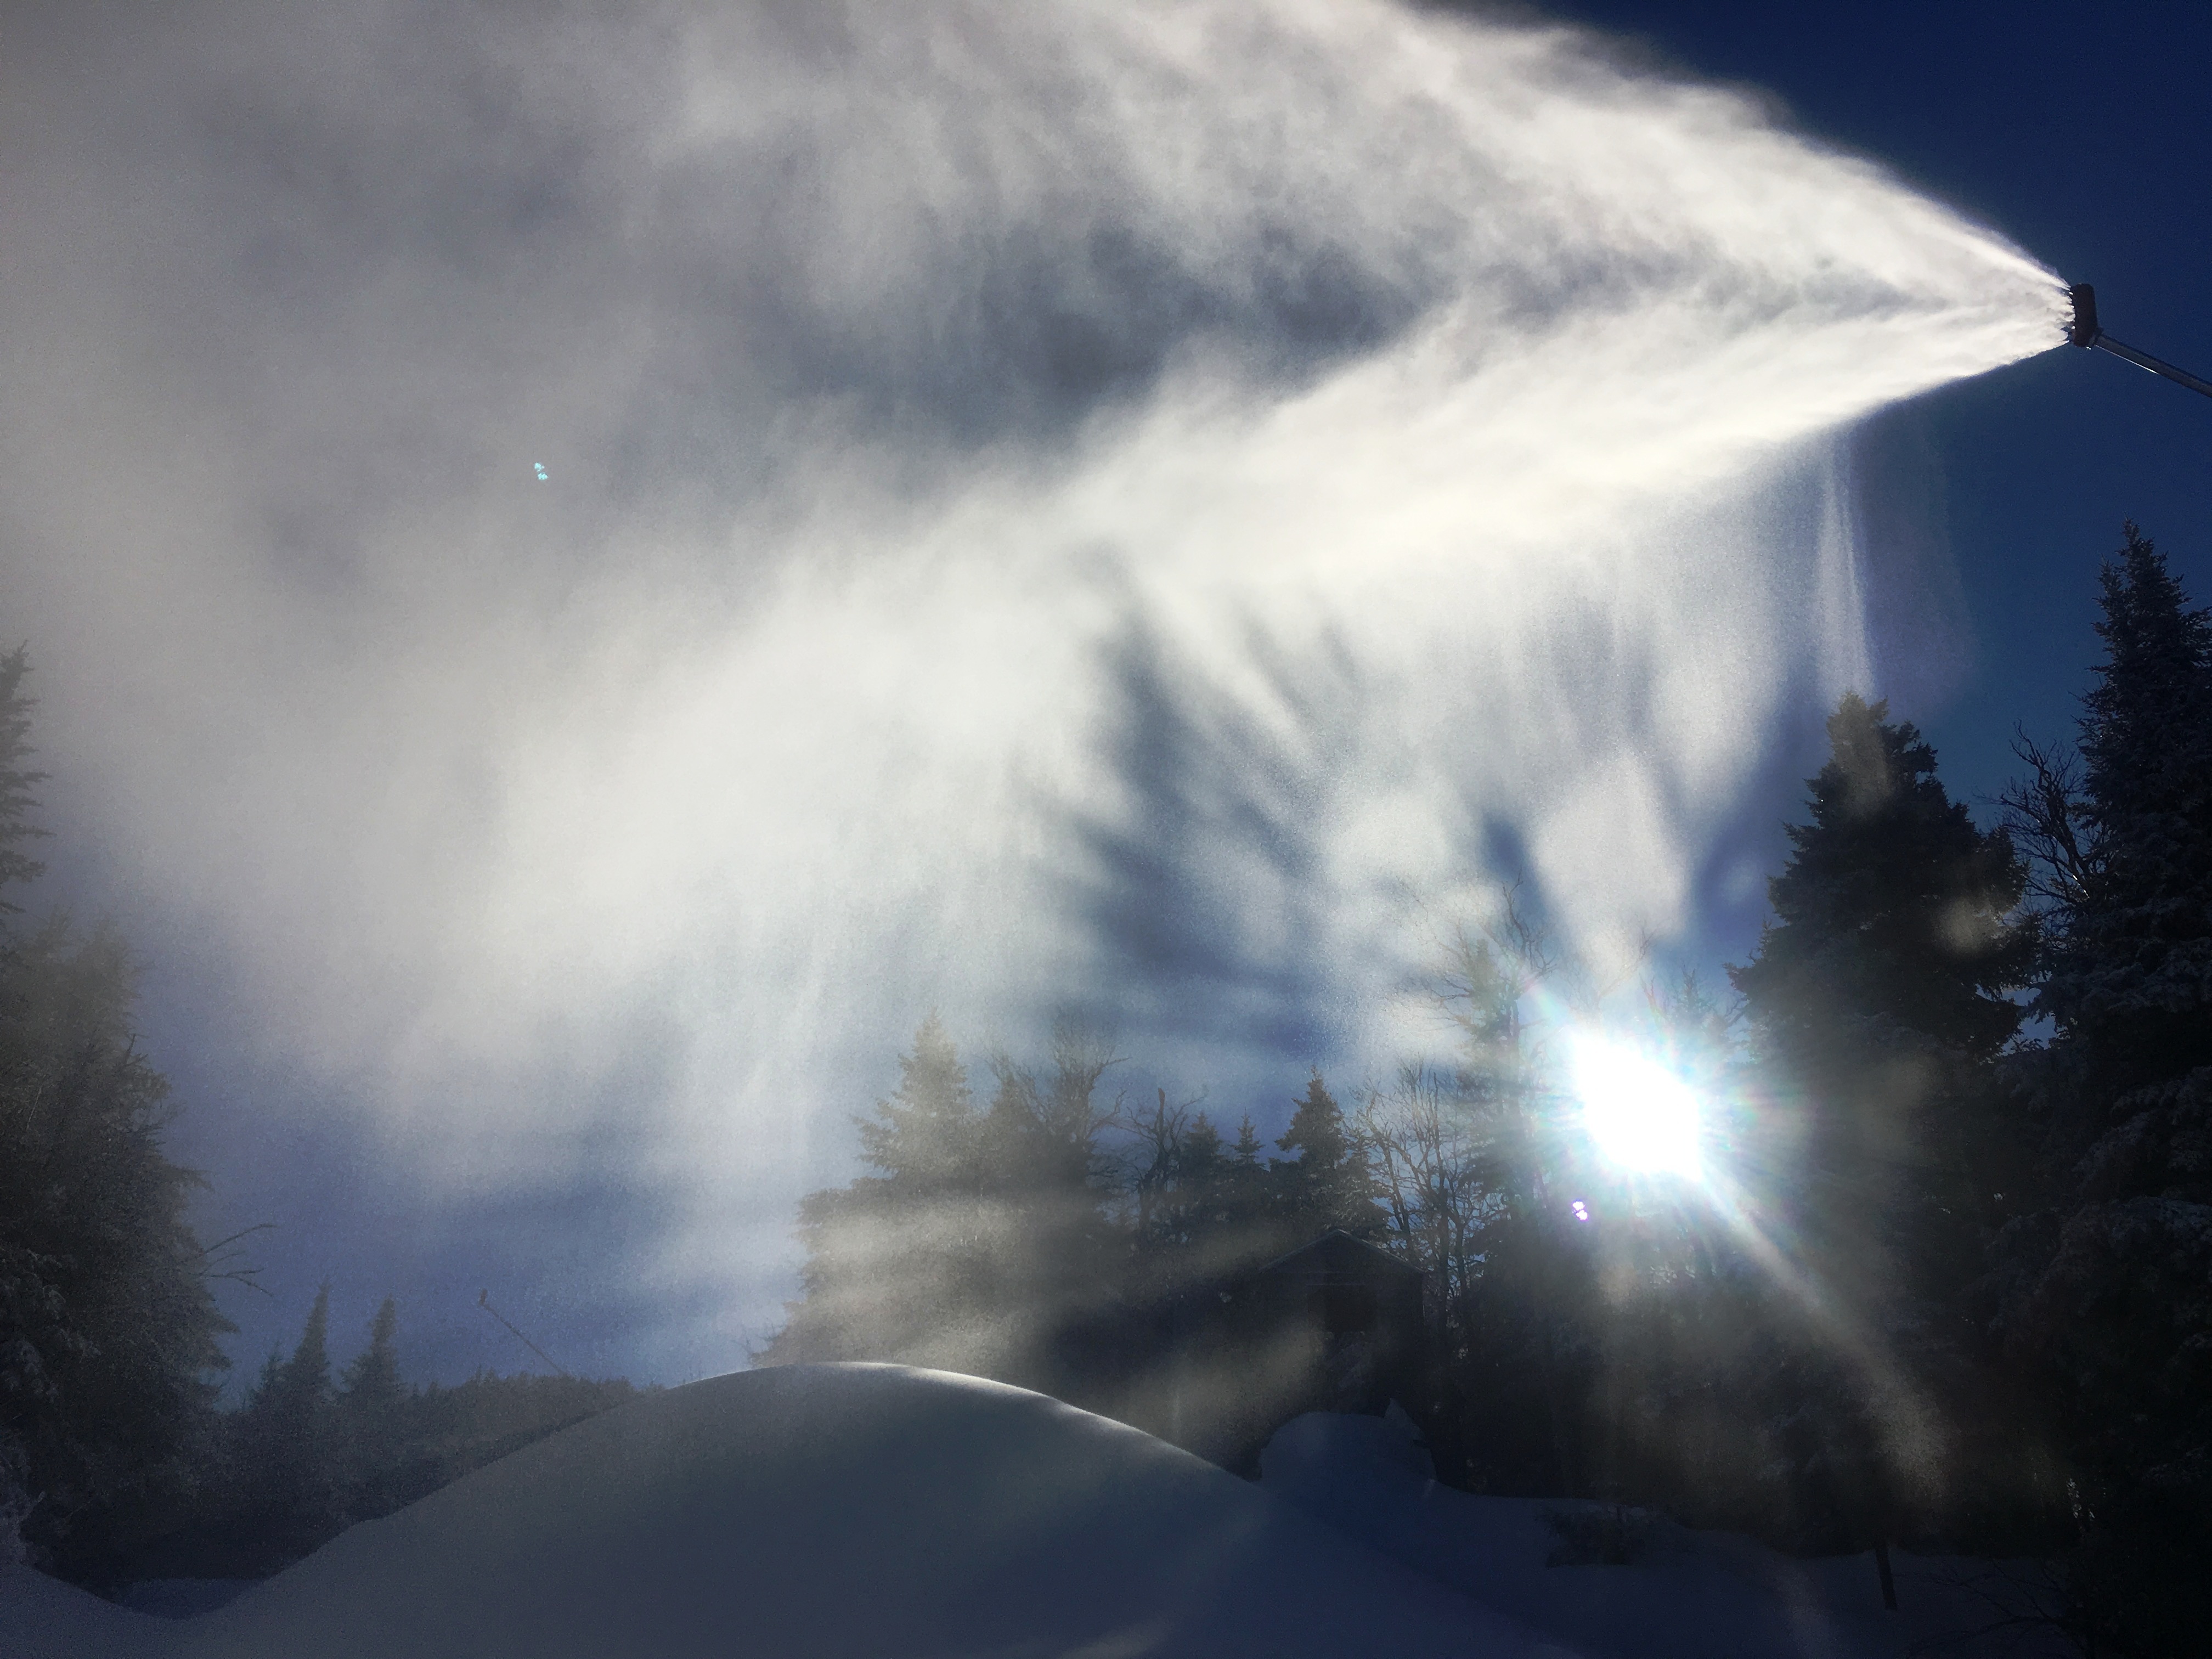 Sunray and Snowmaking December 19, 2016